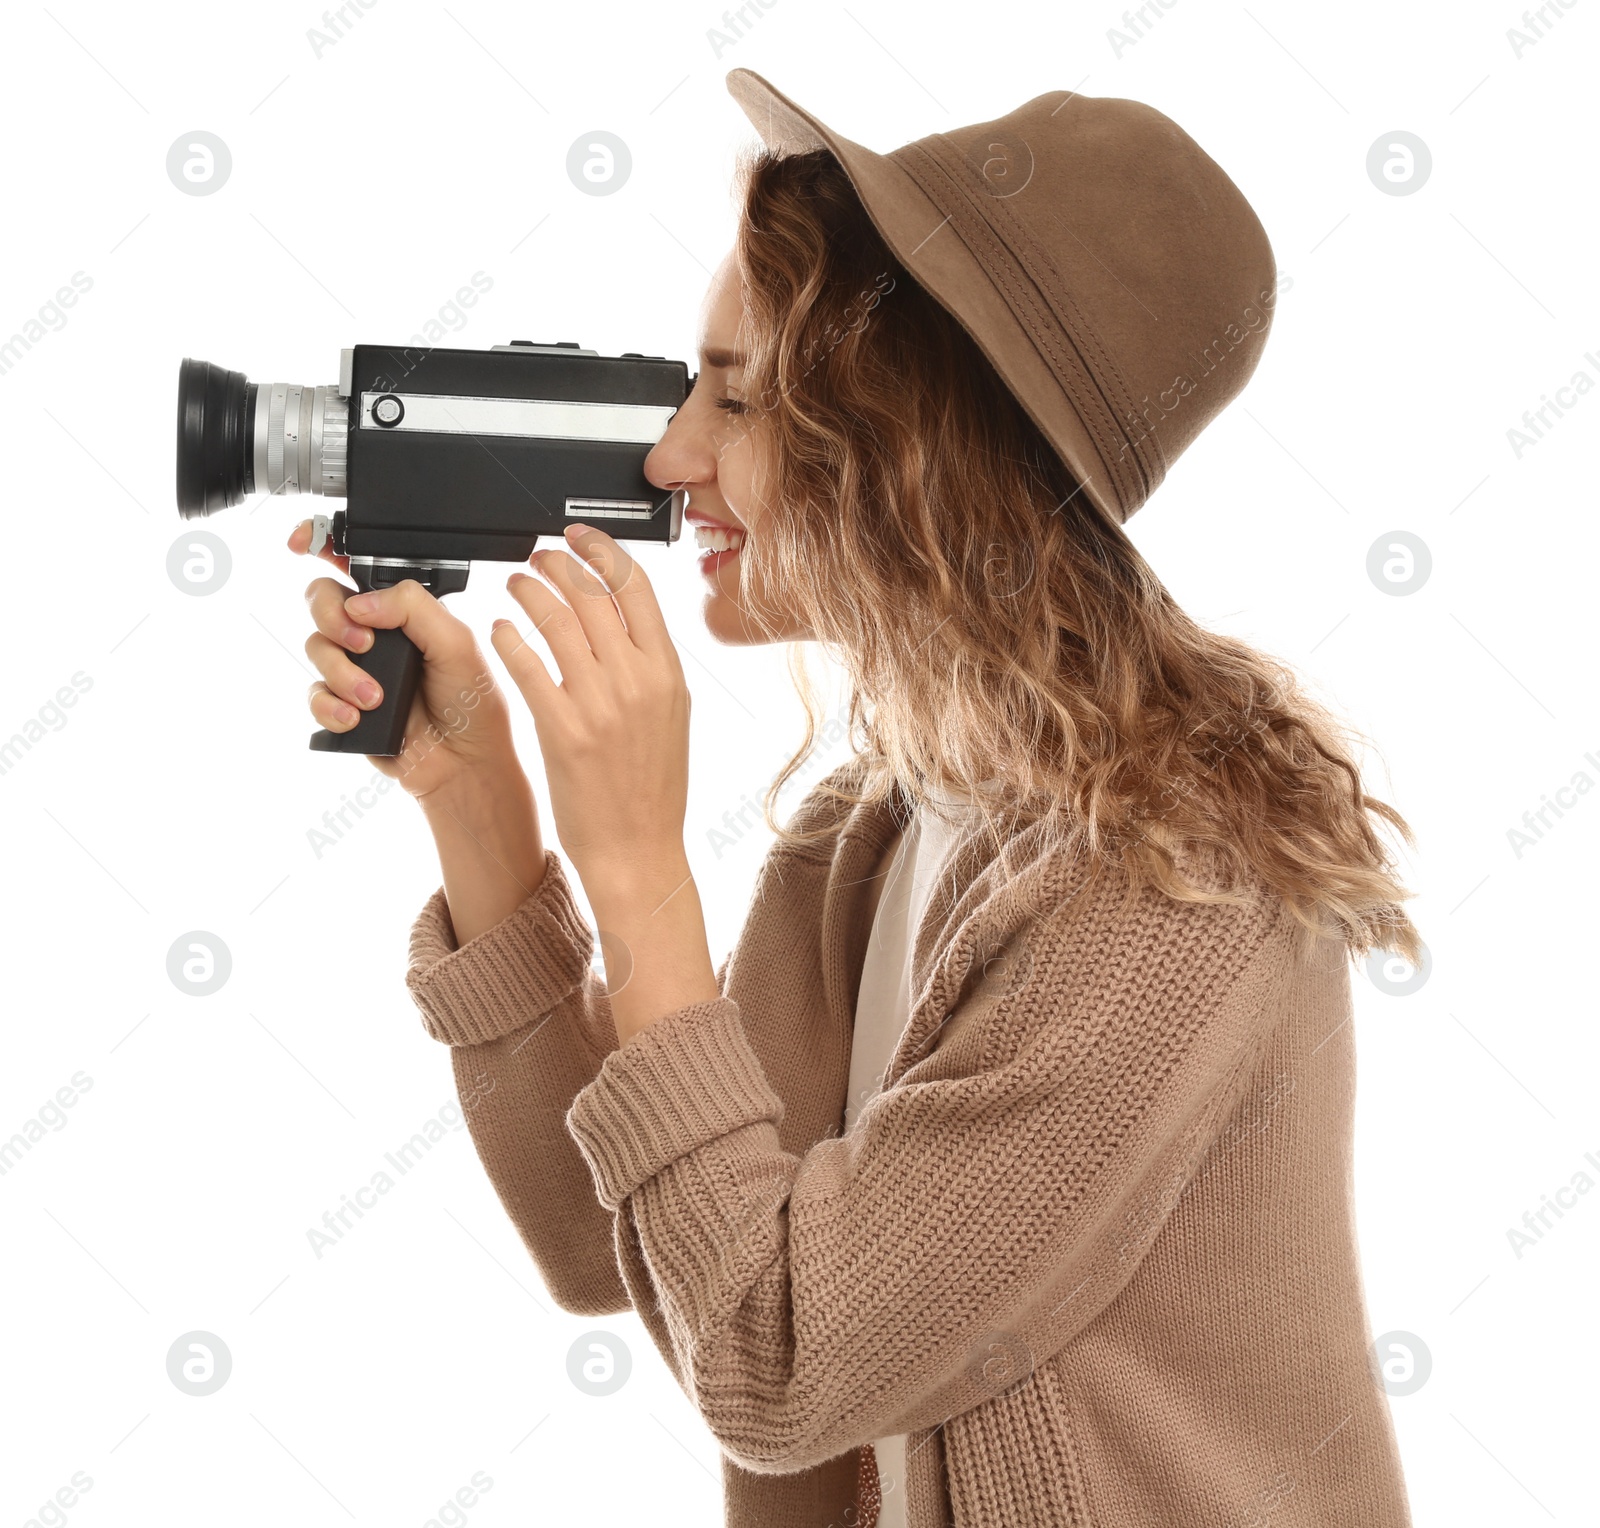 Photo of Beautiful young woman using vintage video camera on white background